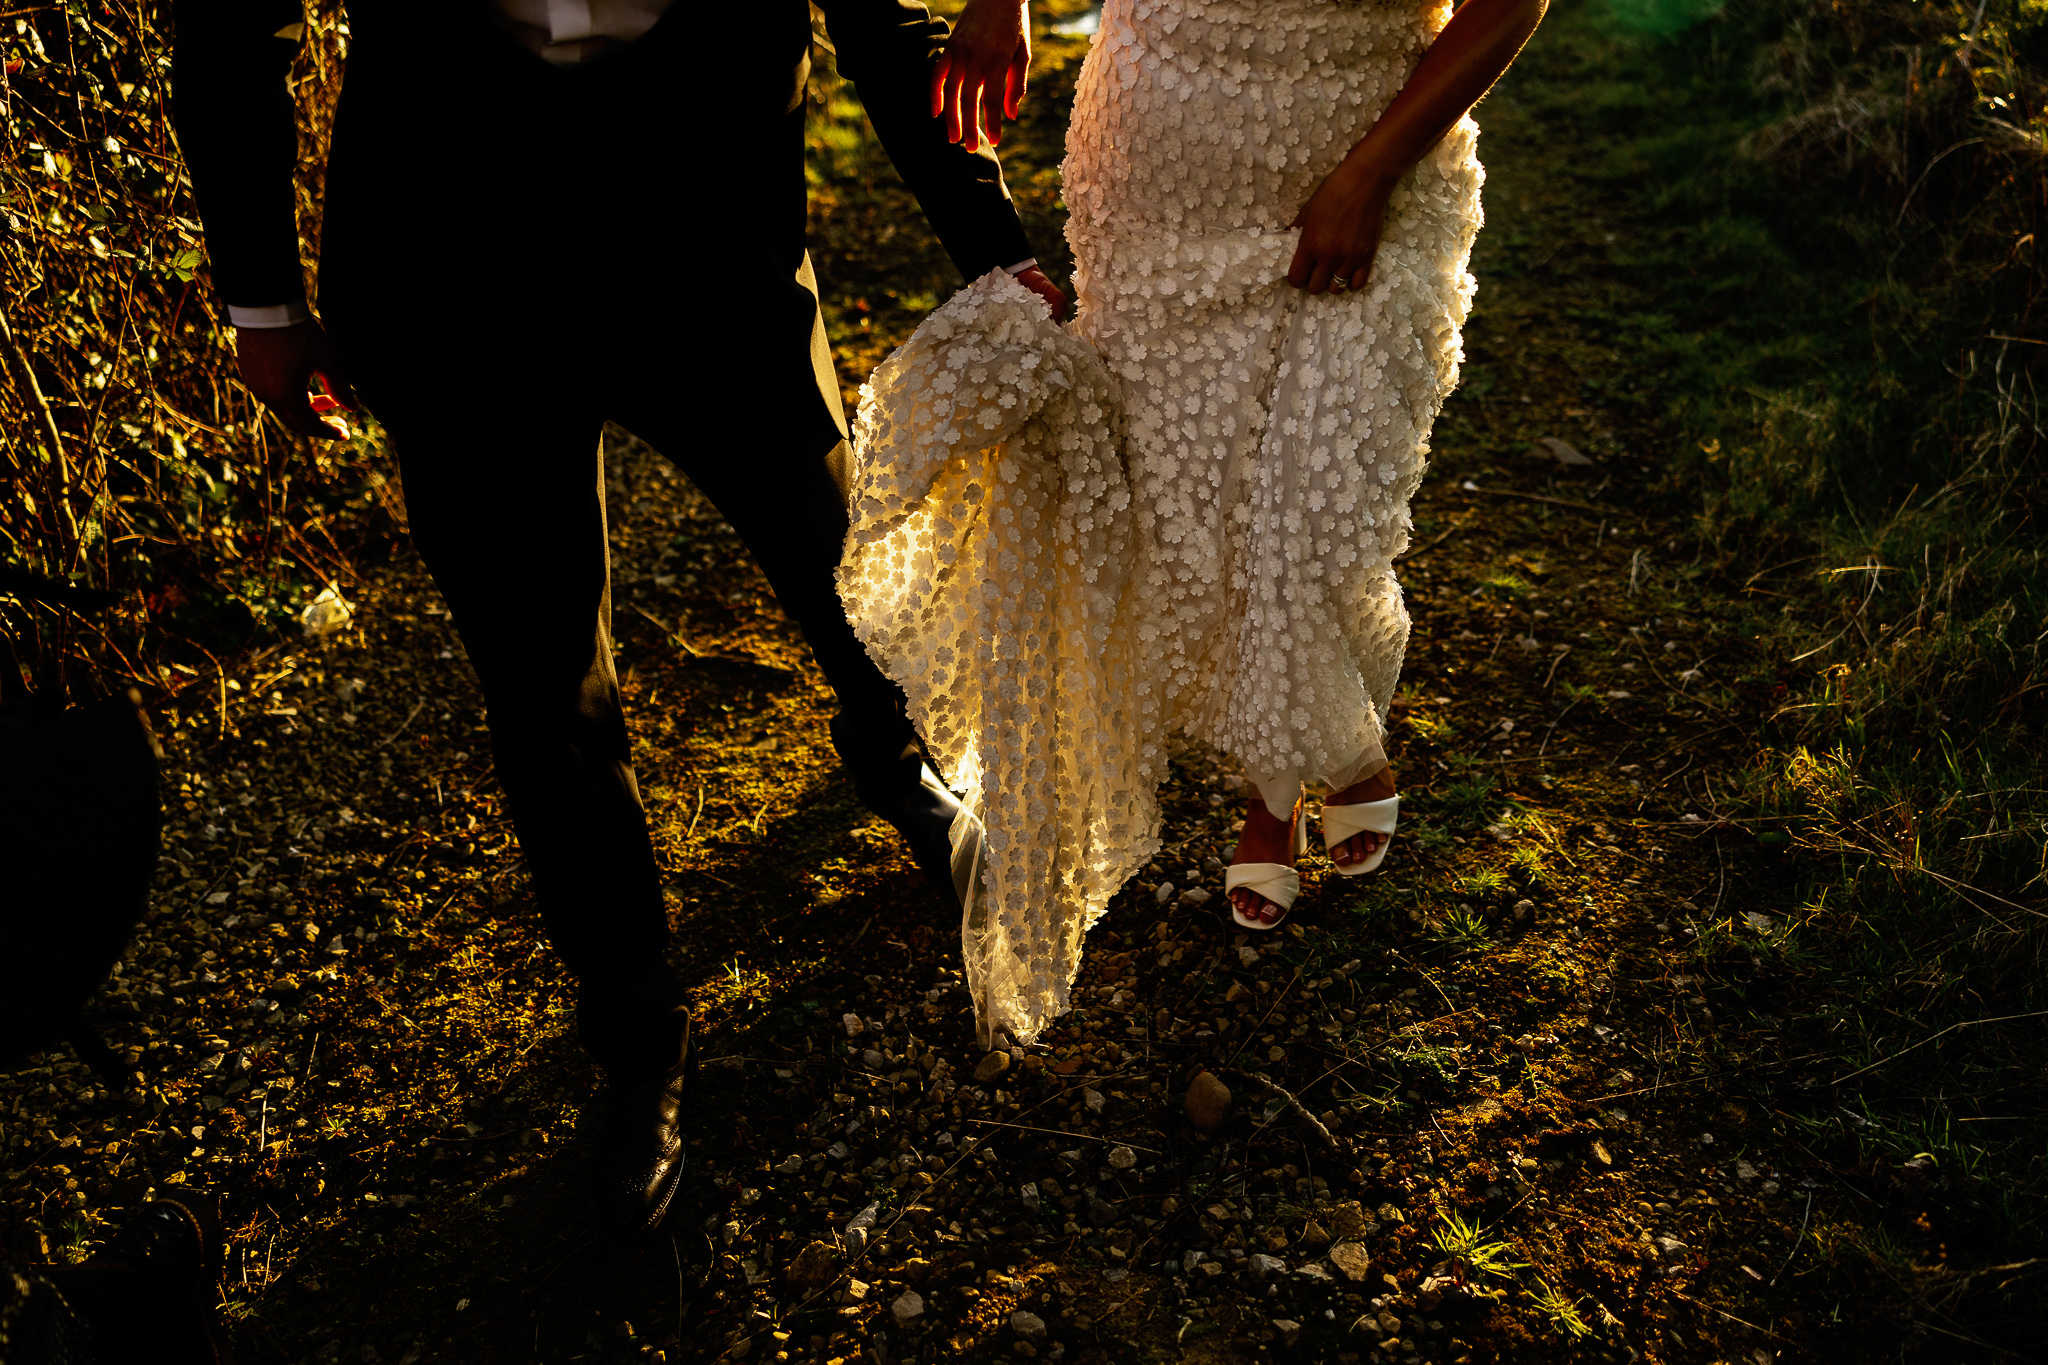 Golden Hour with a bride and groom in Spring 